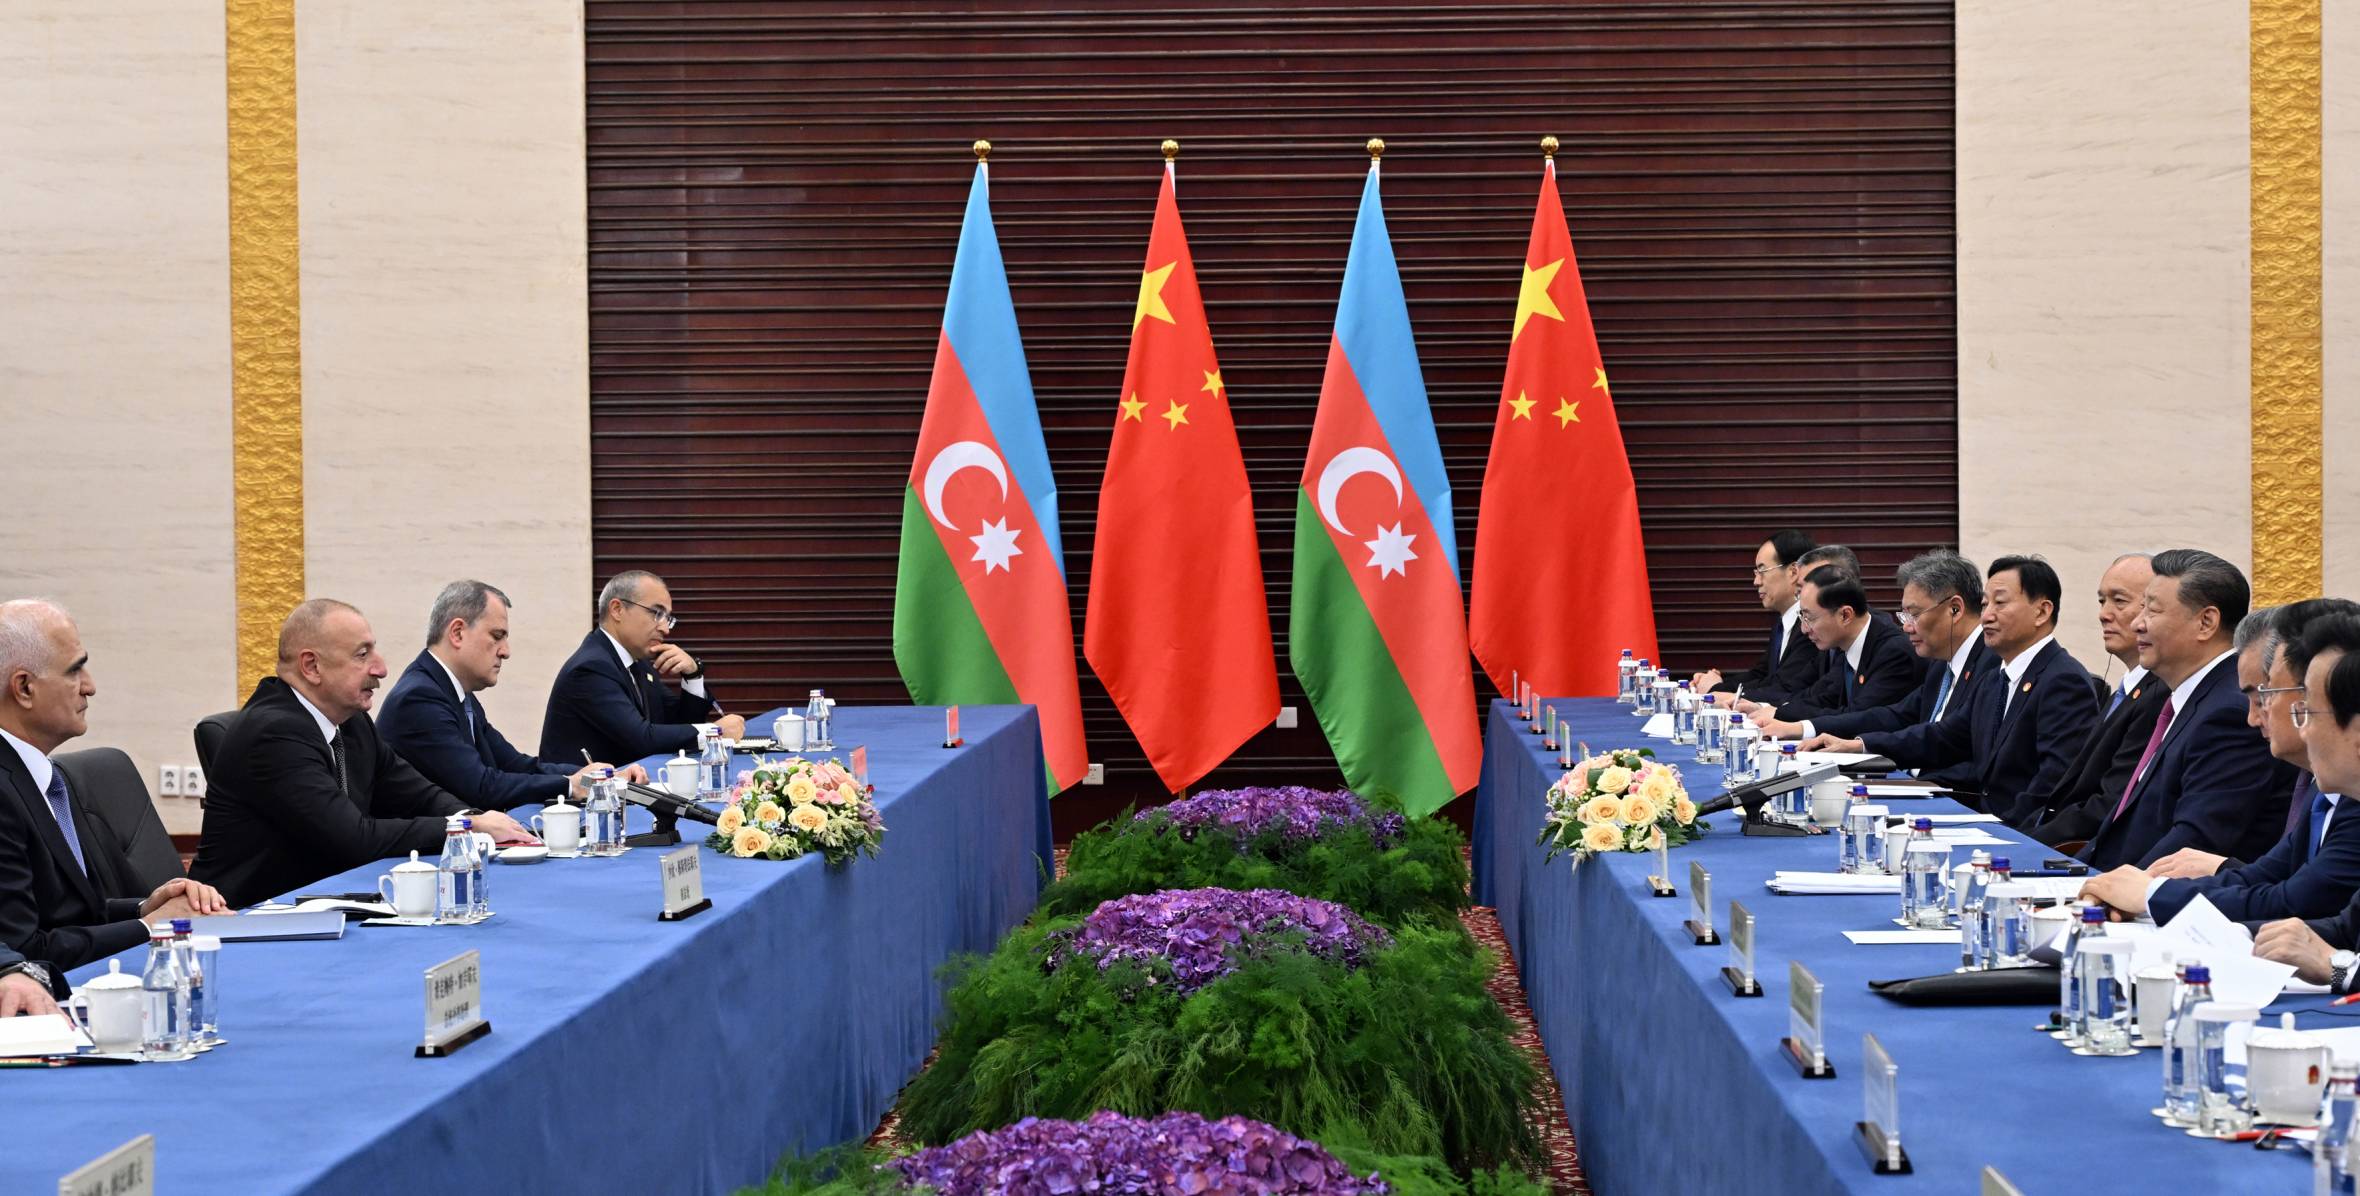 Joint Declaratıon of the Republic of Azerbaijan and the People’s Republic of China on the establishment of a strategic partnership was adopted in Astana